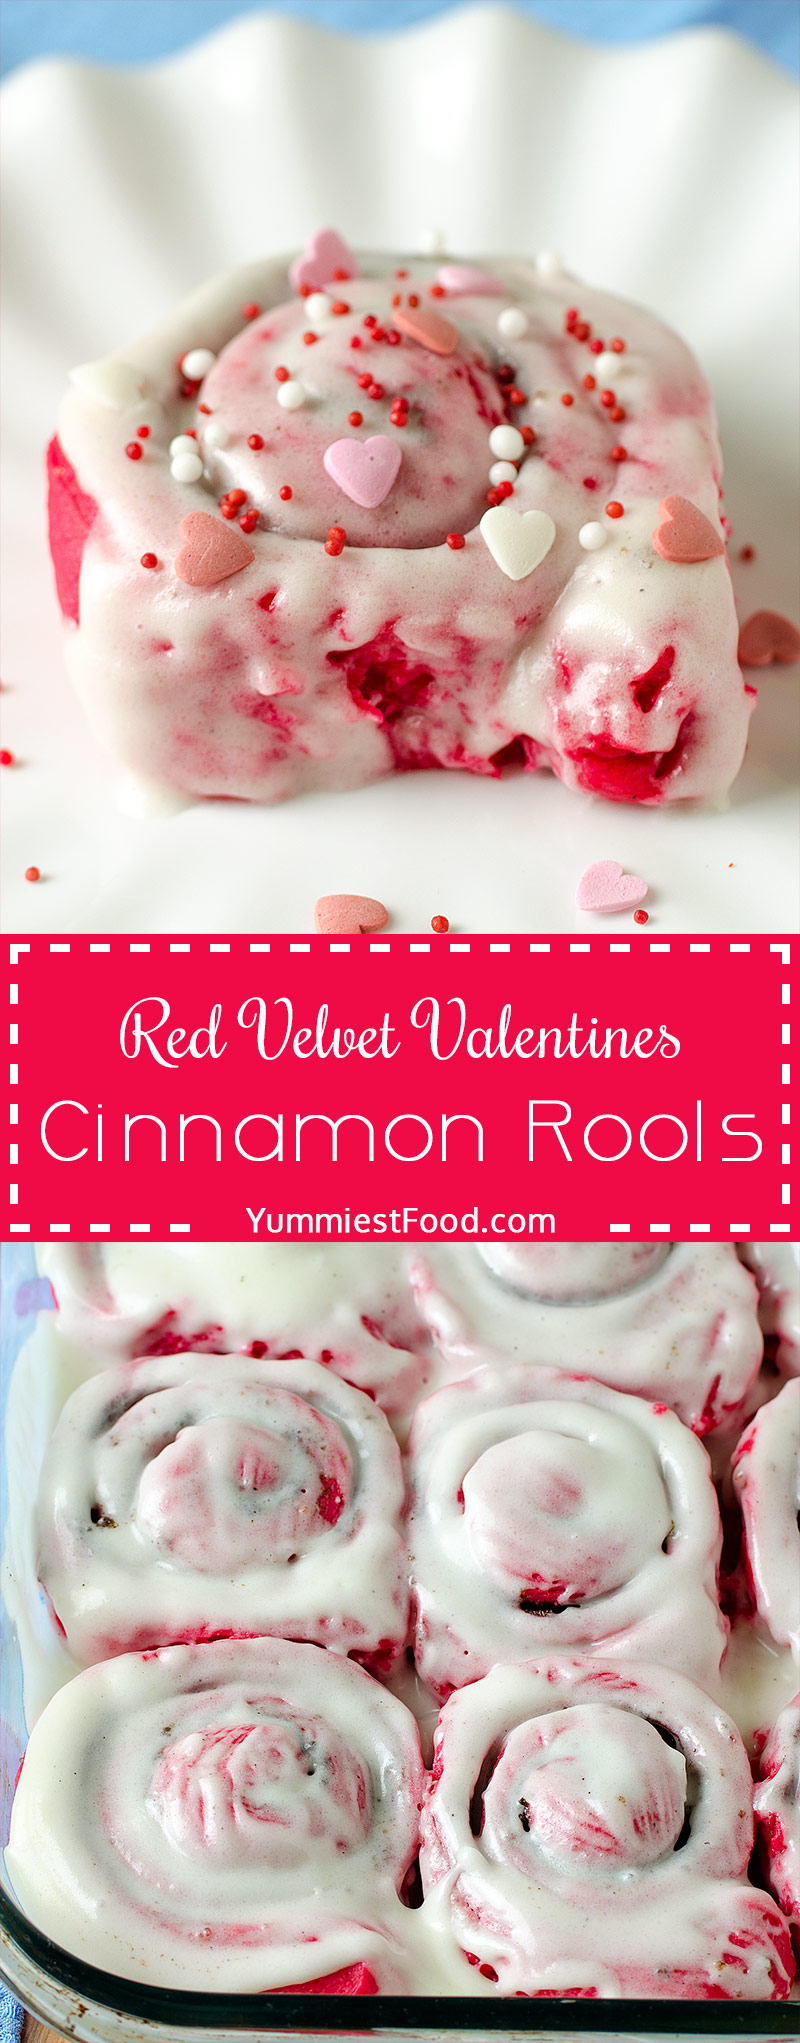 RED VELVET VALENTINES CINNAMON ROOLS – They are filled with cinnamon sugar, topped with cream cheese and sprinkled with love